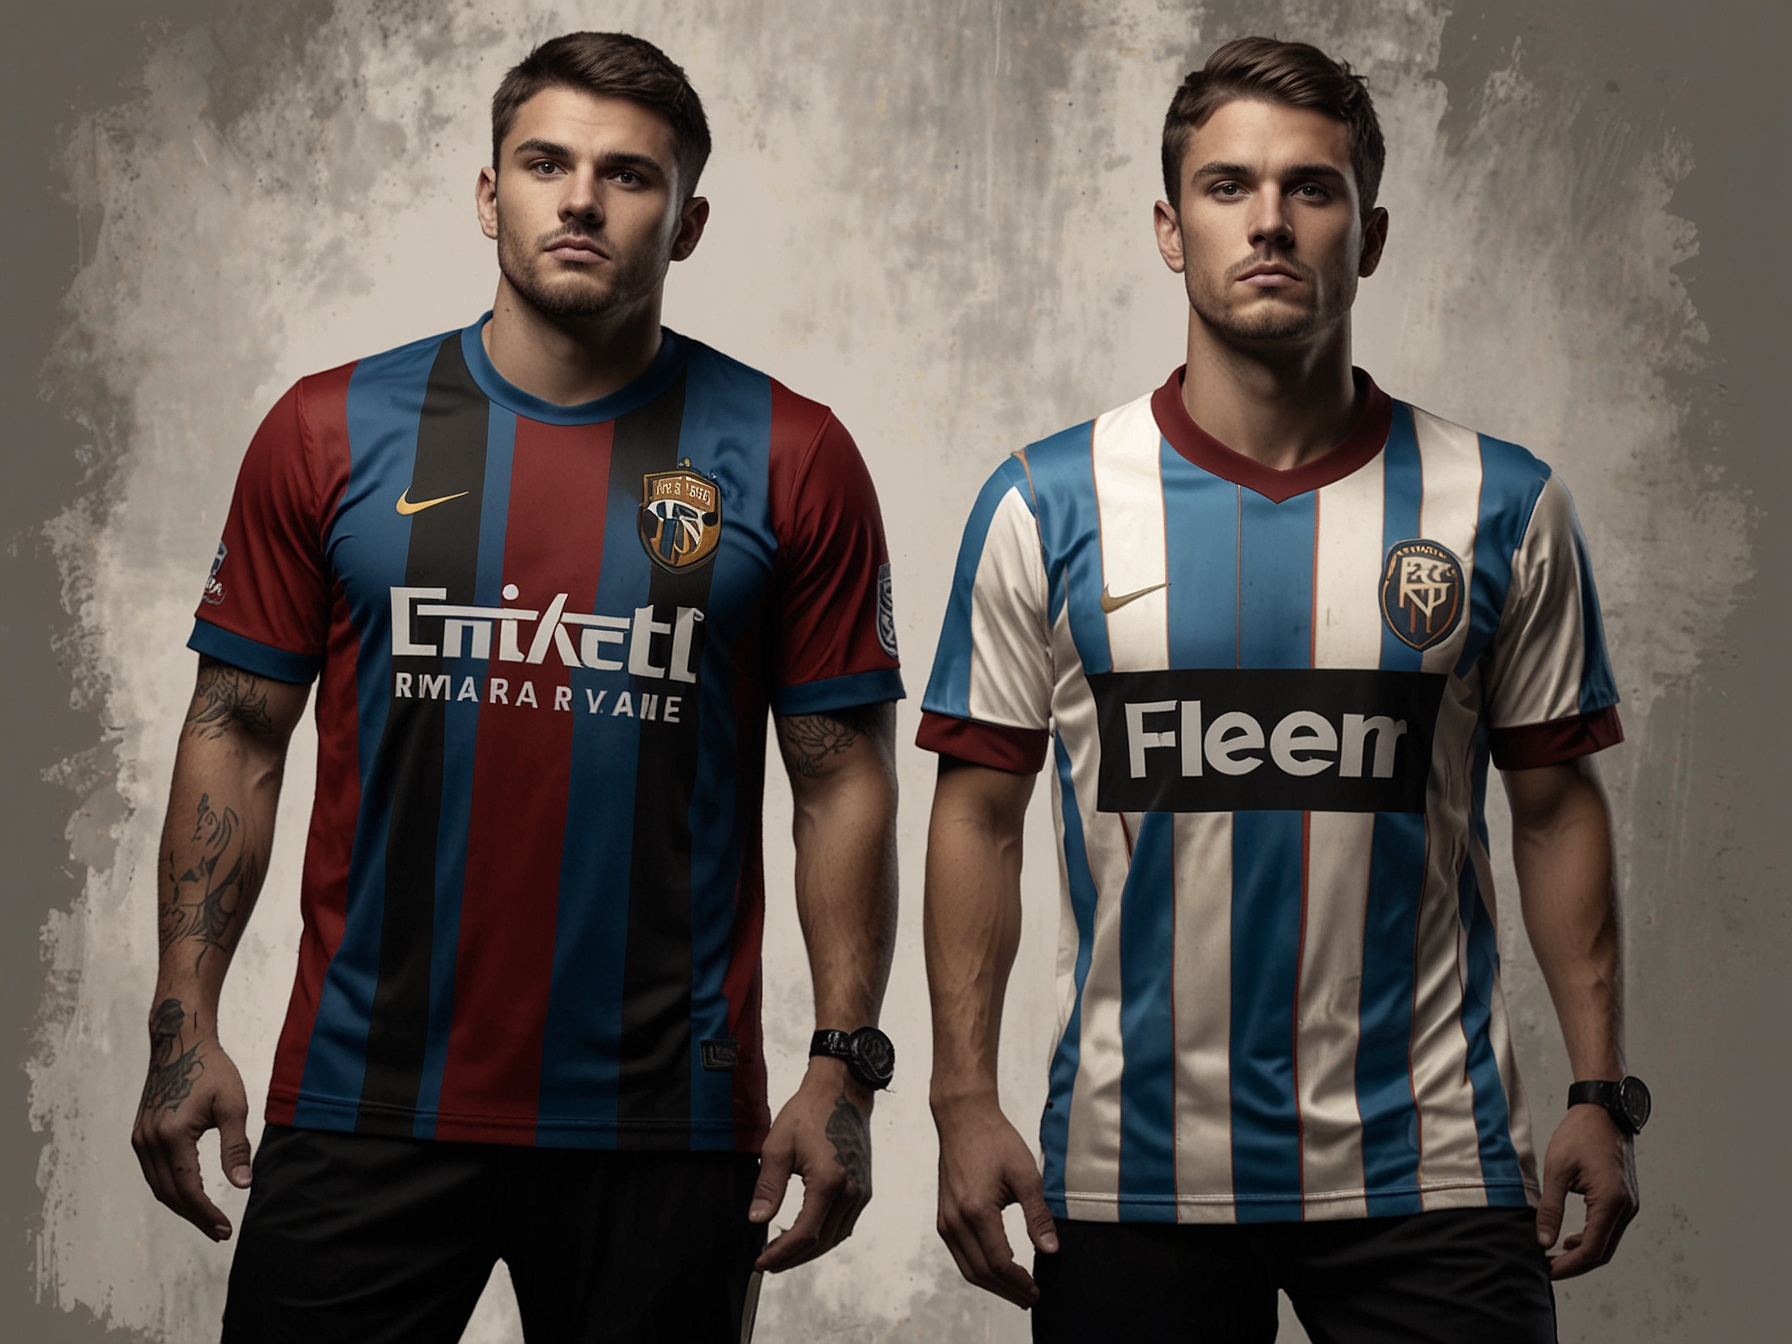 Models wearing the Inter Milan and Roma shirts from the new collection, displaying the iconic blue and black stripes and deep red colors with modern touches and retro fits.